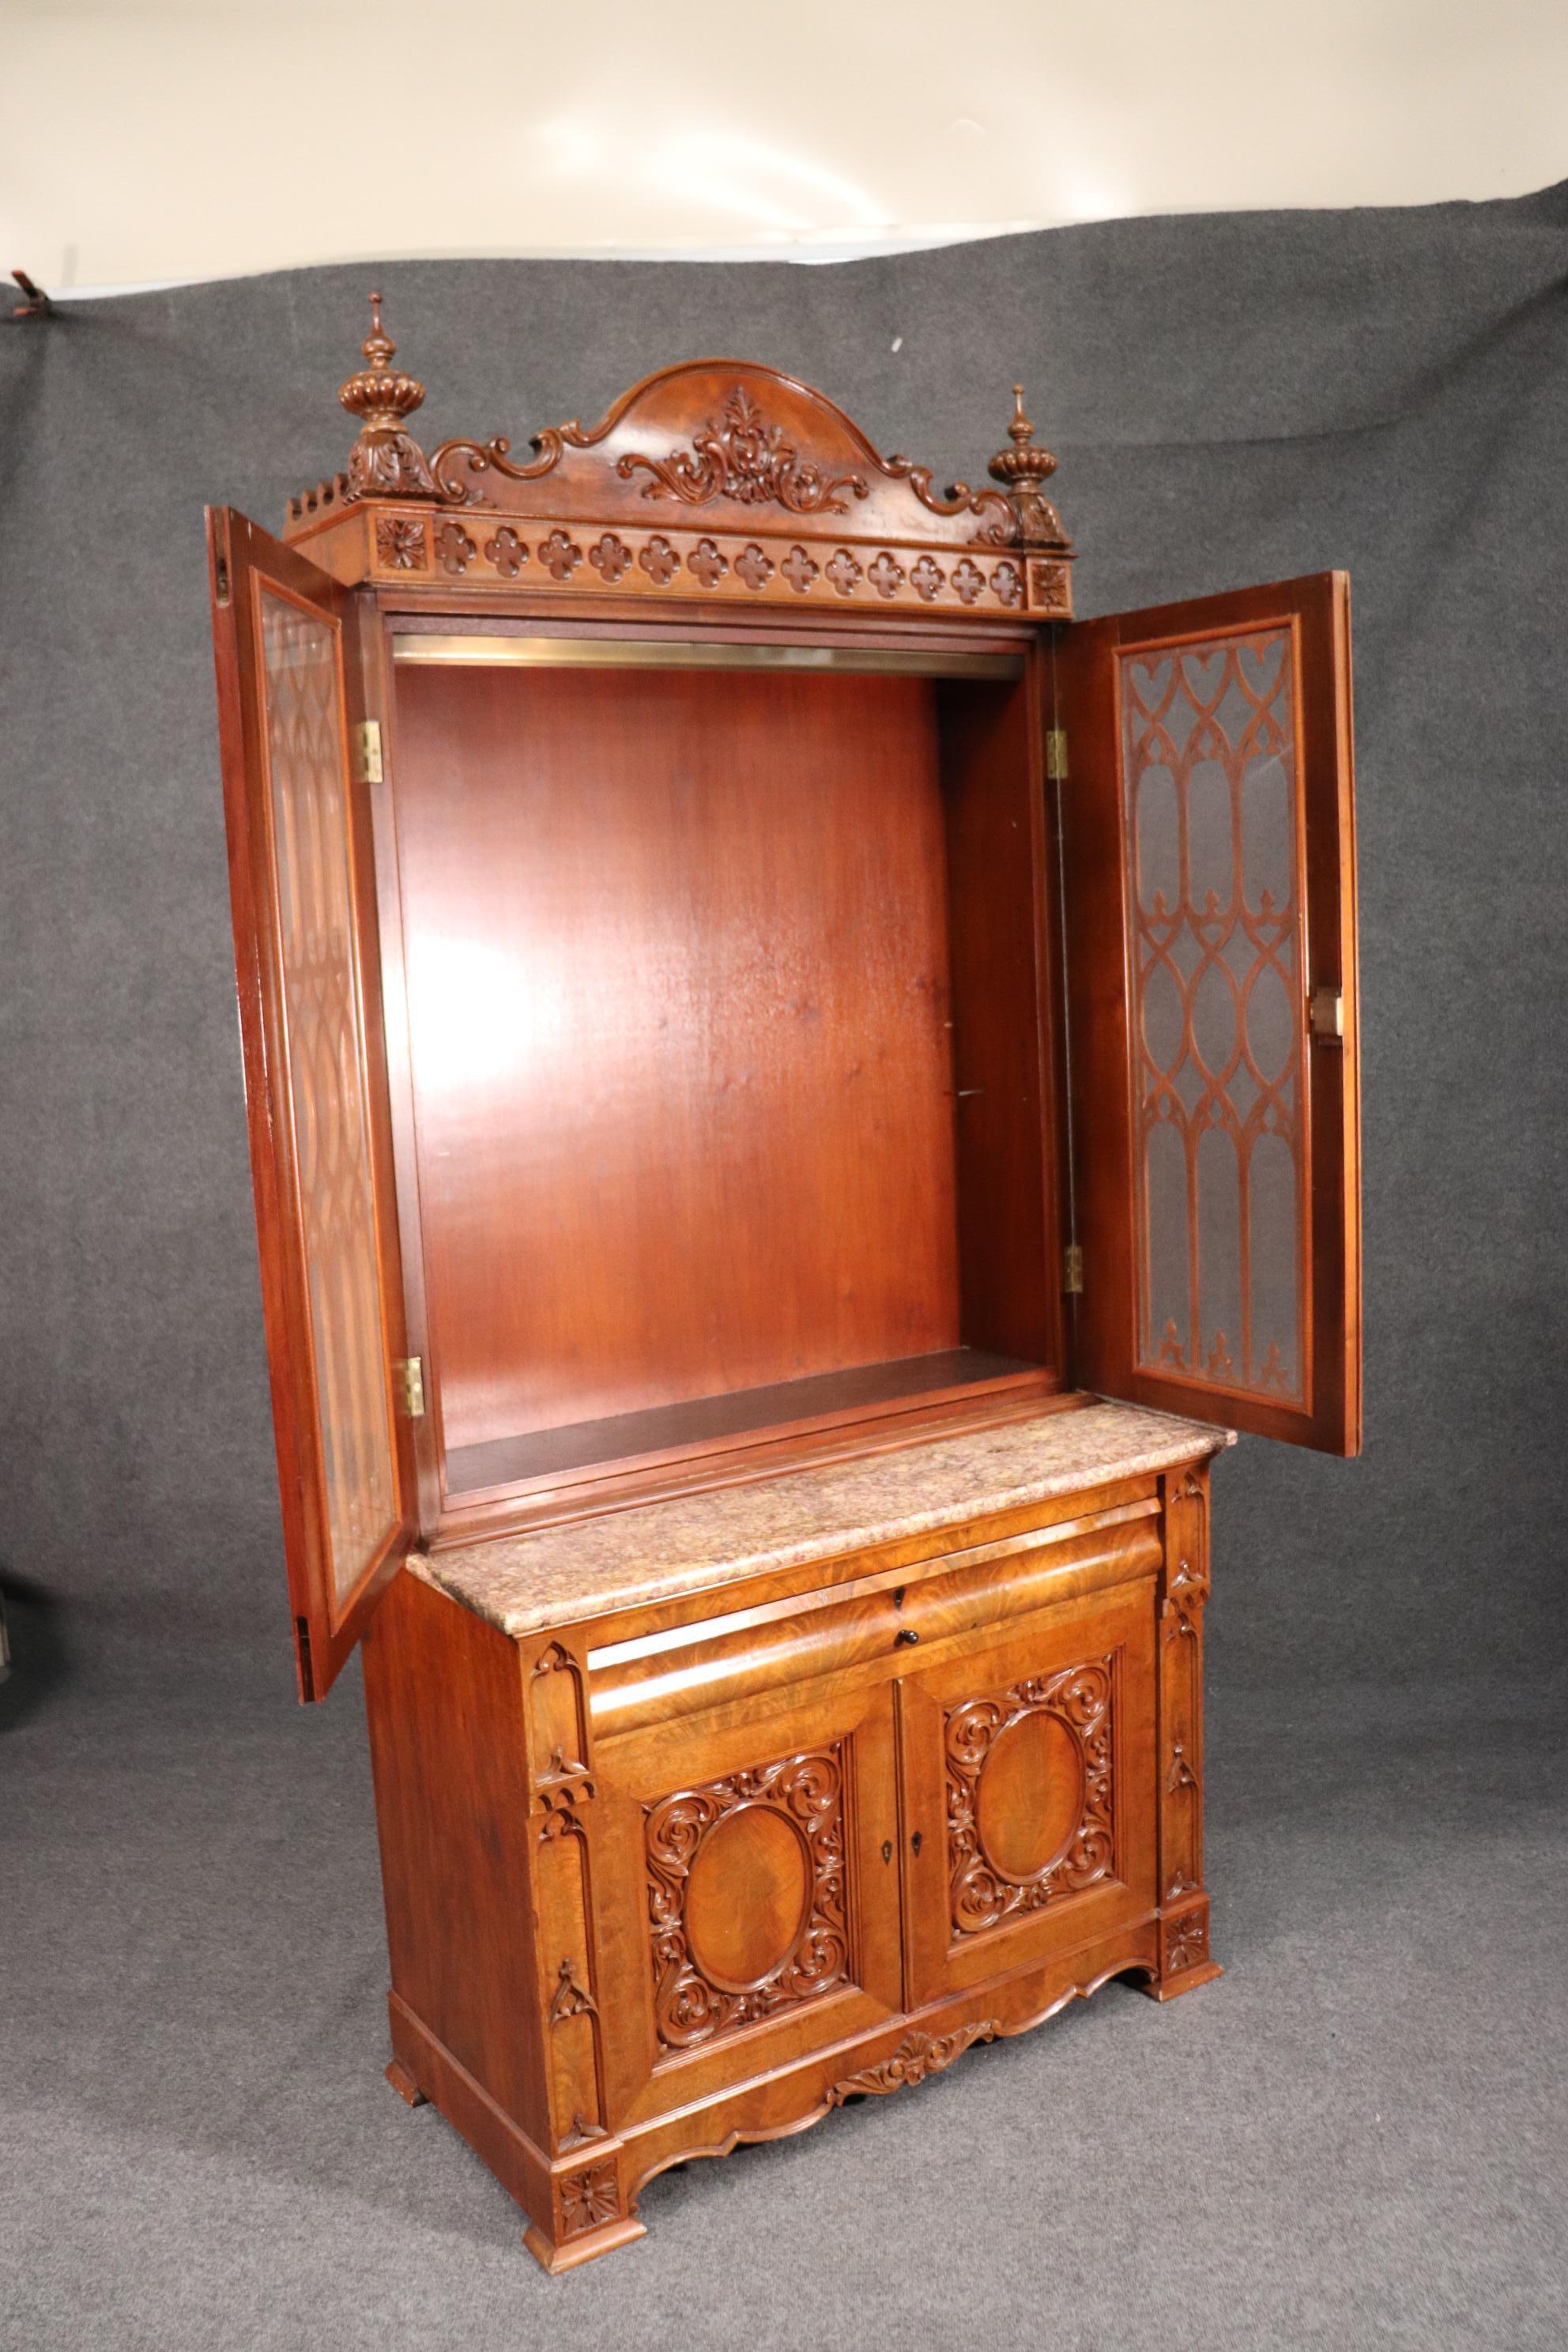 Late 19th Century Late Victorian Gothic Secretary Desk Bookcase Seeded Glass Marble Top 1890s Era